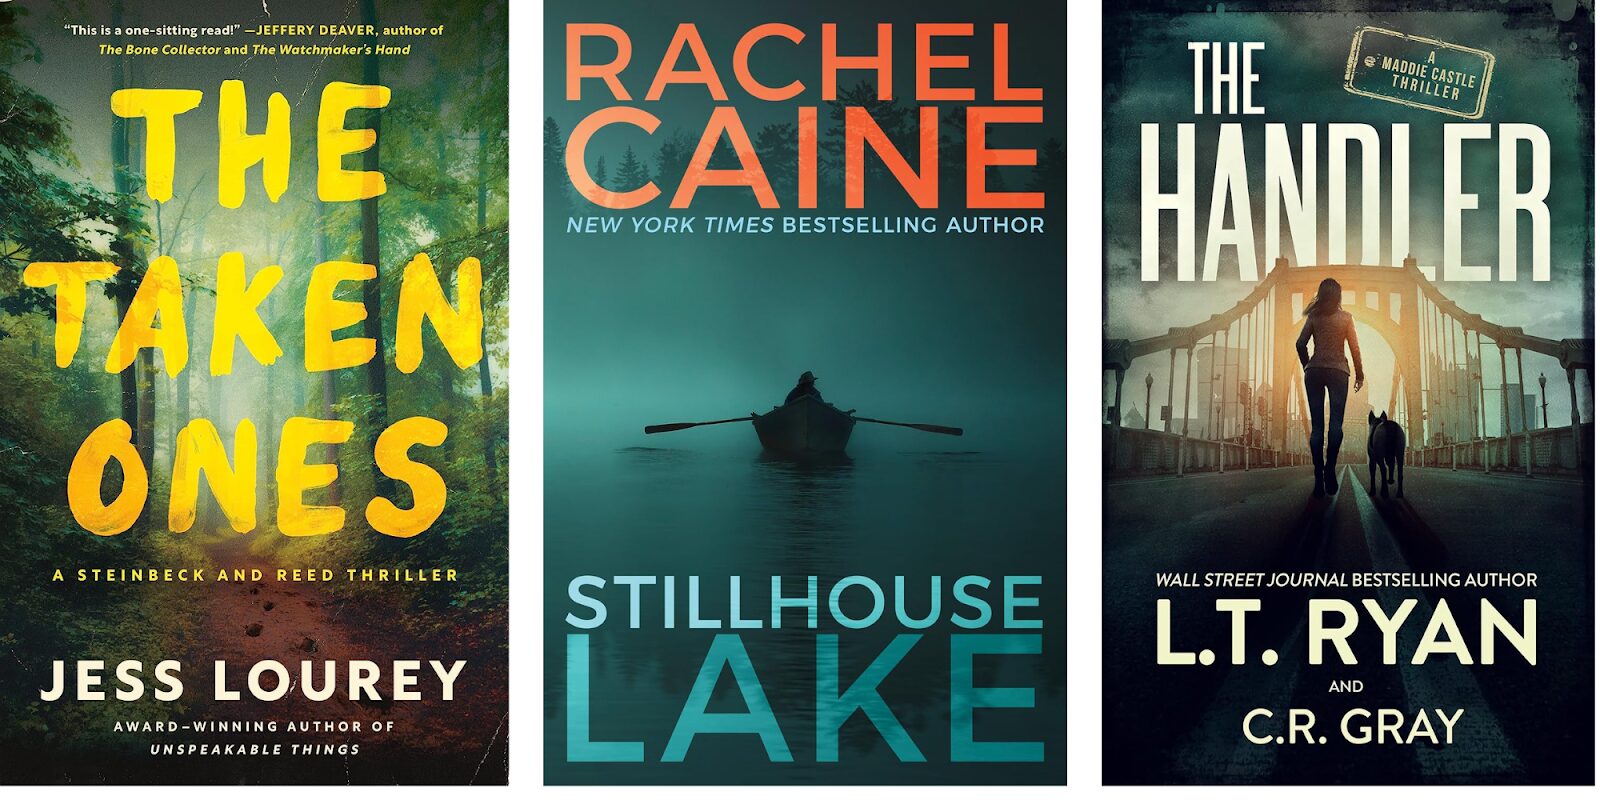 design your own book cover - crime thriller imagery using creepy atmospheres